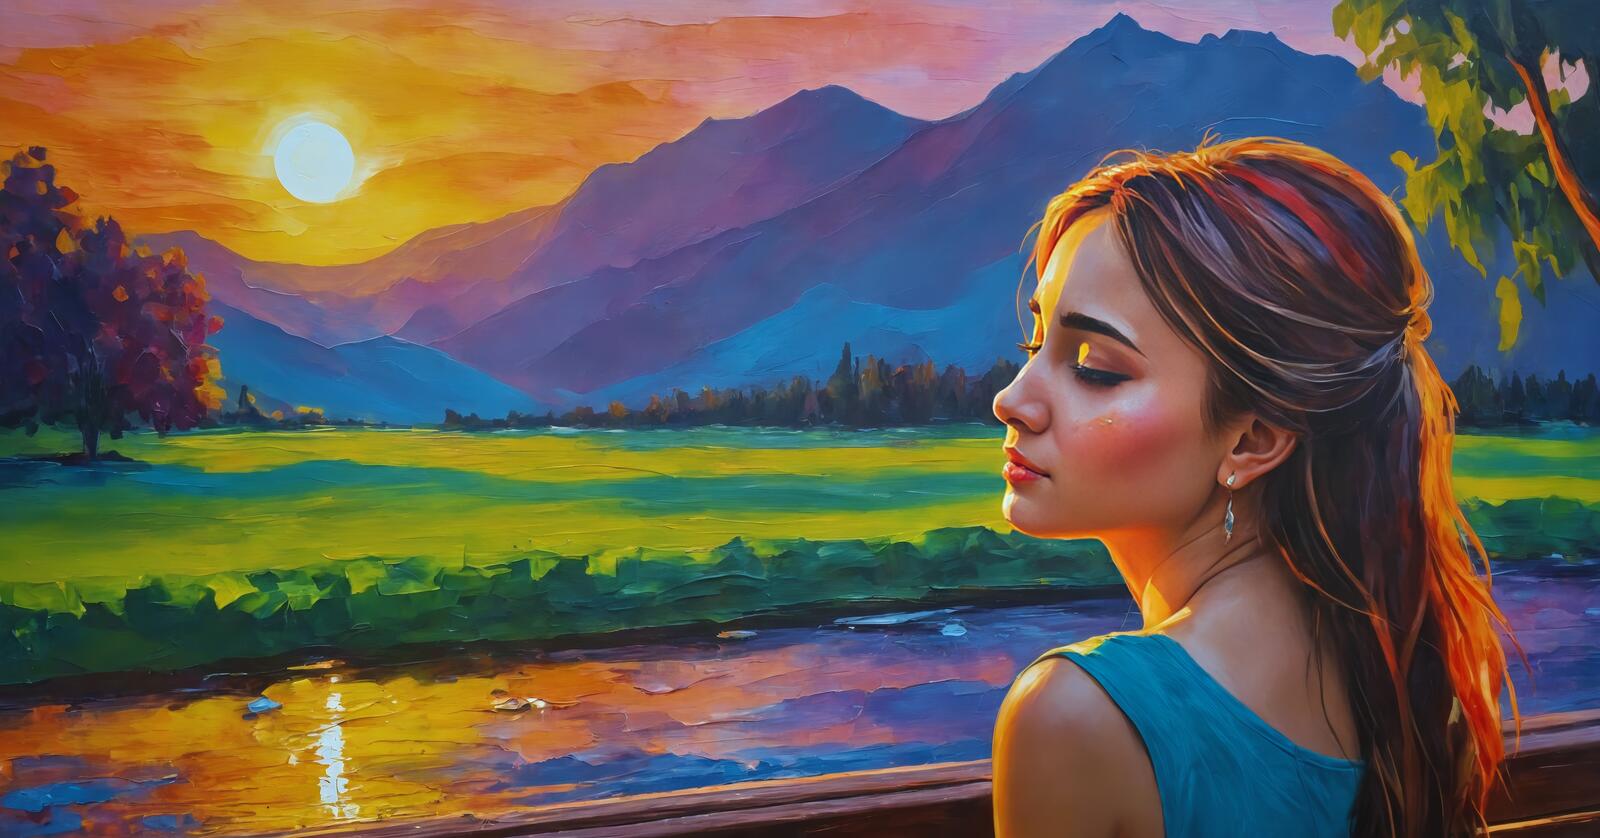 Free photo Painting by a girl in a green dress looking out at a field